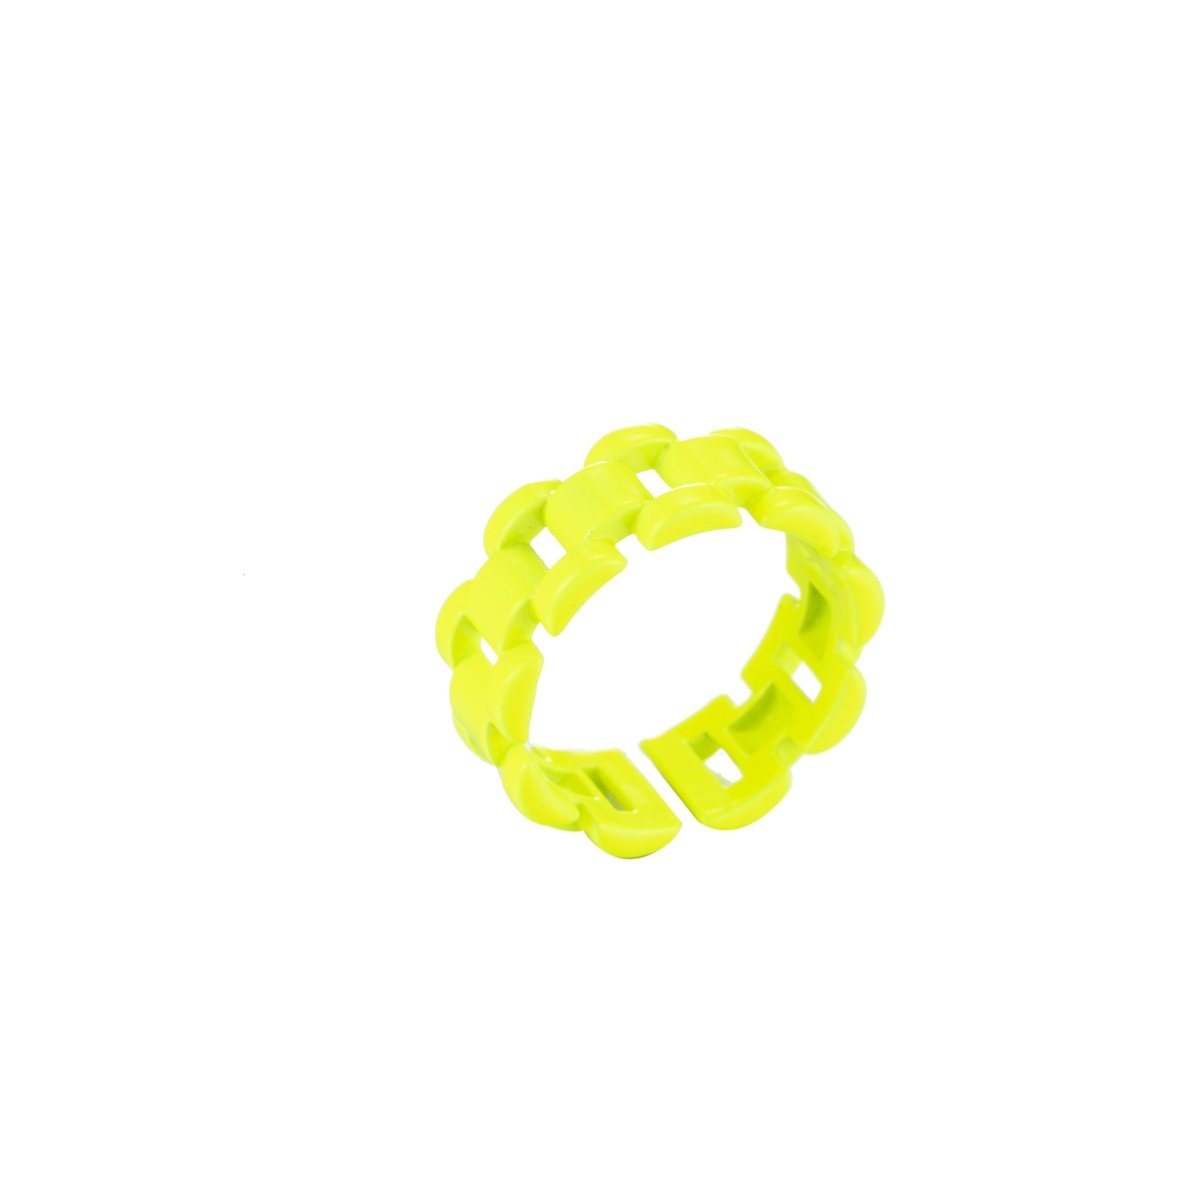 Chunky Y2K style retro ring Open Adjustable Colorful Watch Chain Link ring Summer Trend Rings Neon Enamel Chain for Fun Stackable Jewelryg Yellow Green Blue Purple Pink Teal Neon Ring Jewelry Size 6.5 - DLUXCA